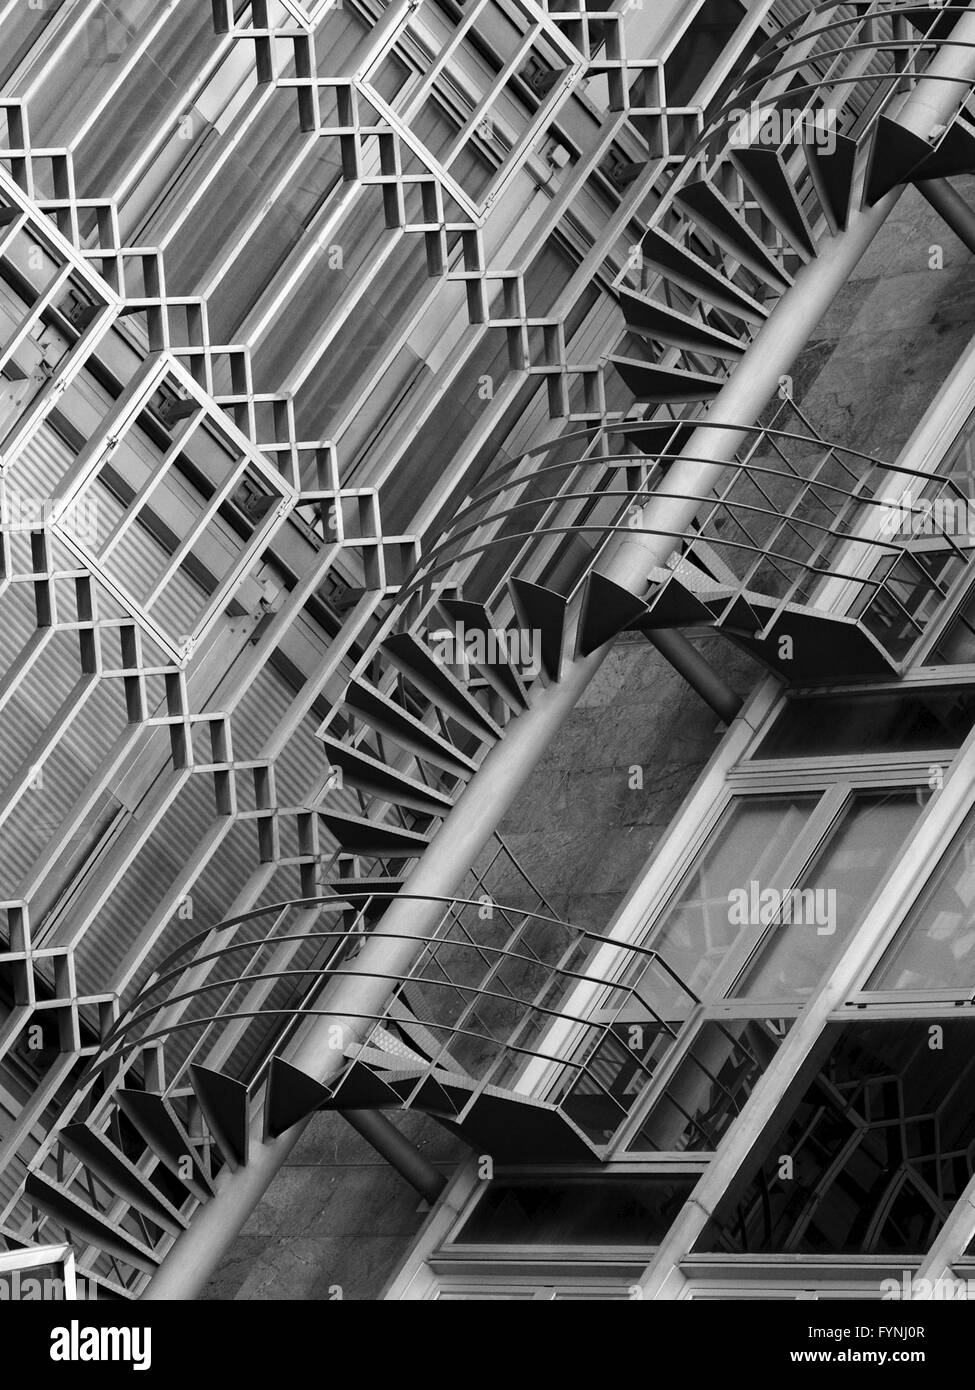 Mono image of external winding stairs and exterior architectural details on office building in Barcelona, Spain Stock Photo